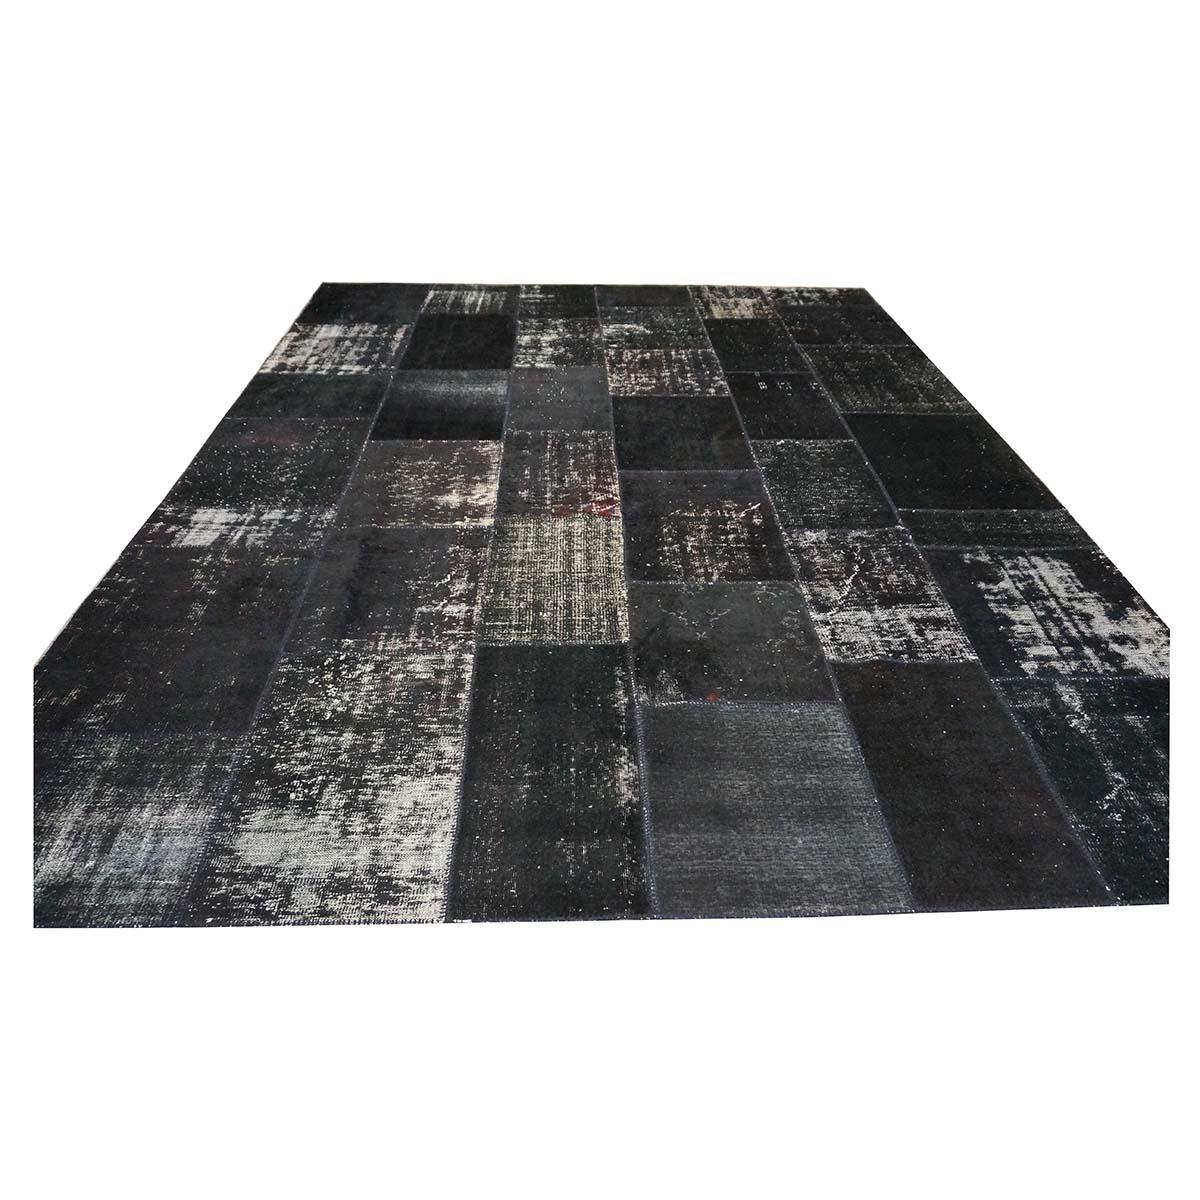  Ashly Fine Rugs presents a Vintage Turkish Patchwork 10x13 area rug. This rug a is combination of multiple handmade vintage Turkish rugs that have been masterfully cut and sewn together to create a new and modern look. The rug is mostly black with